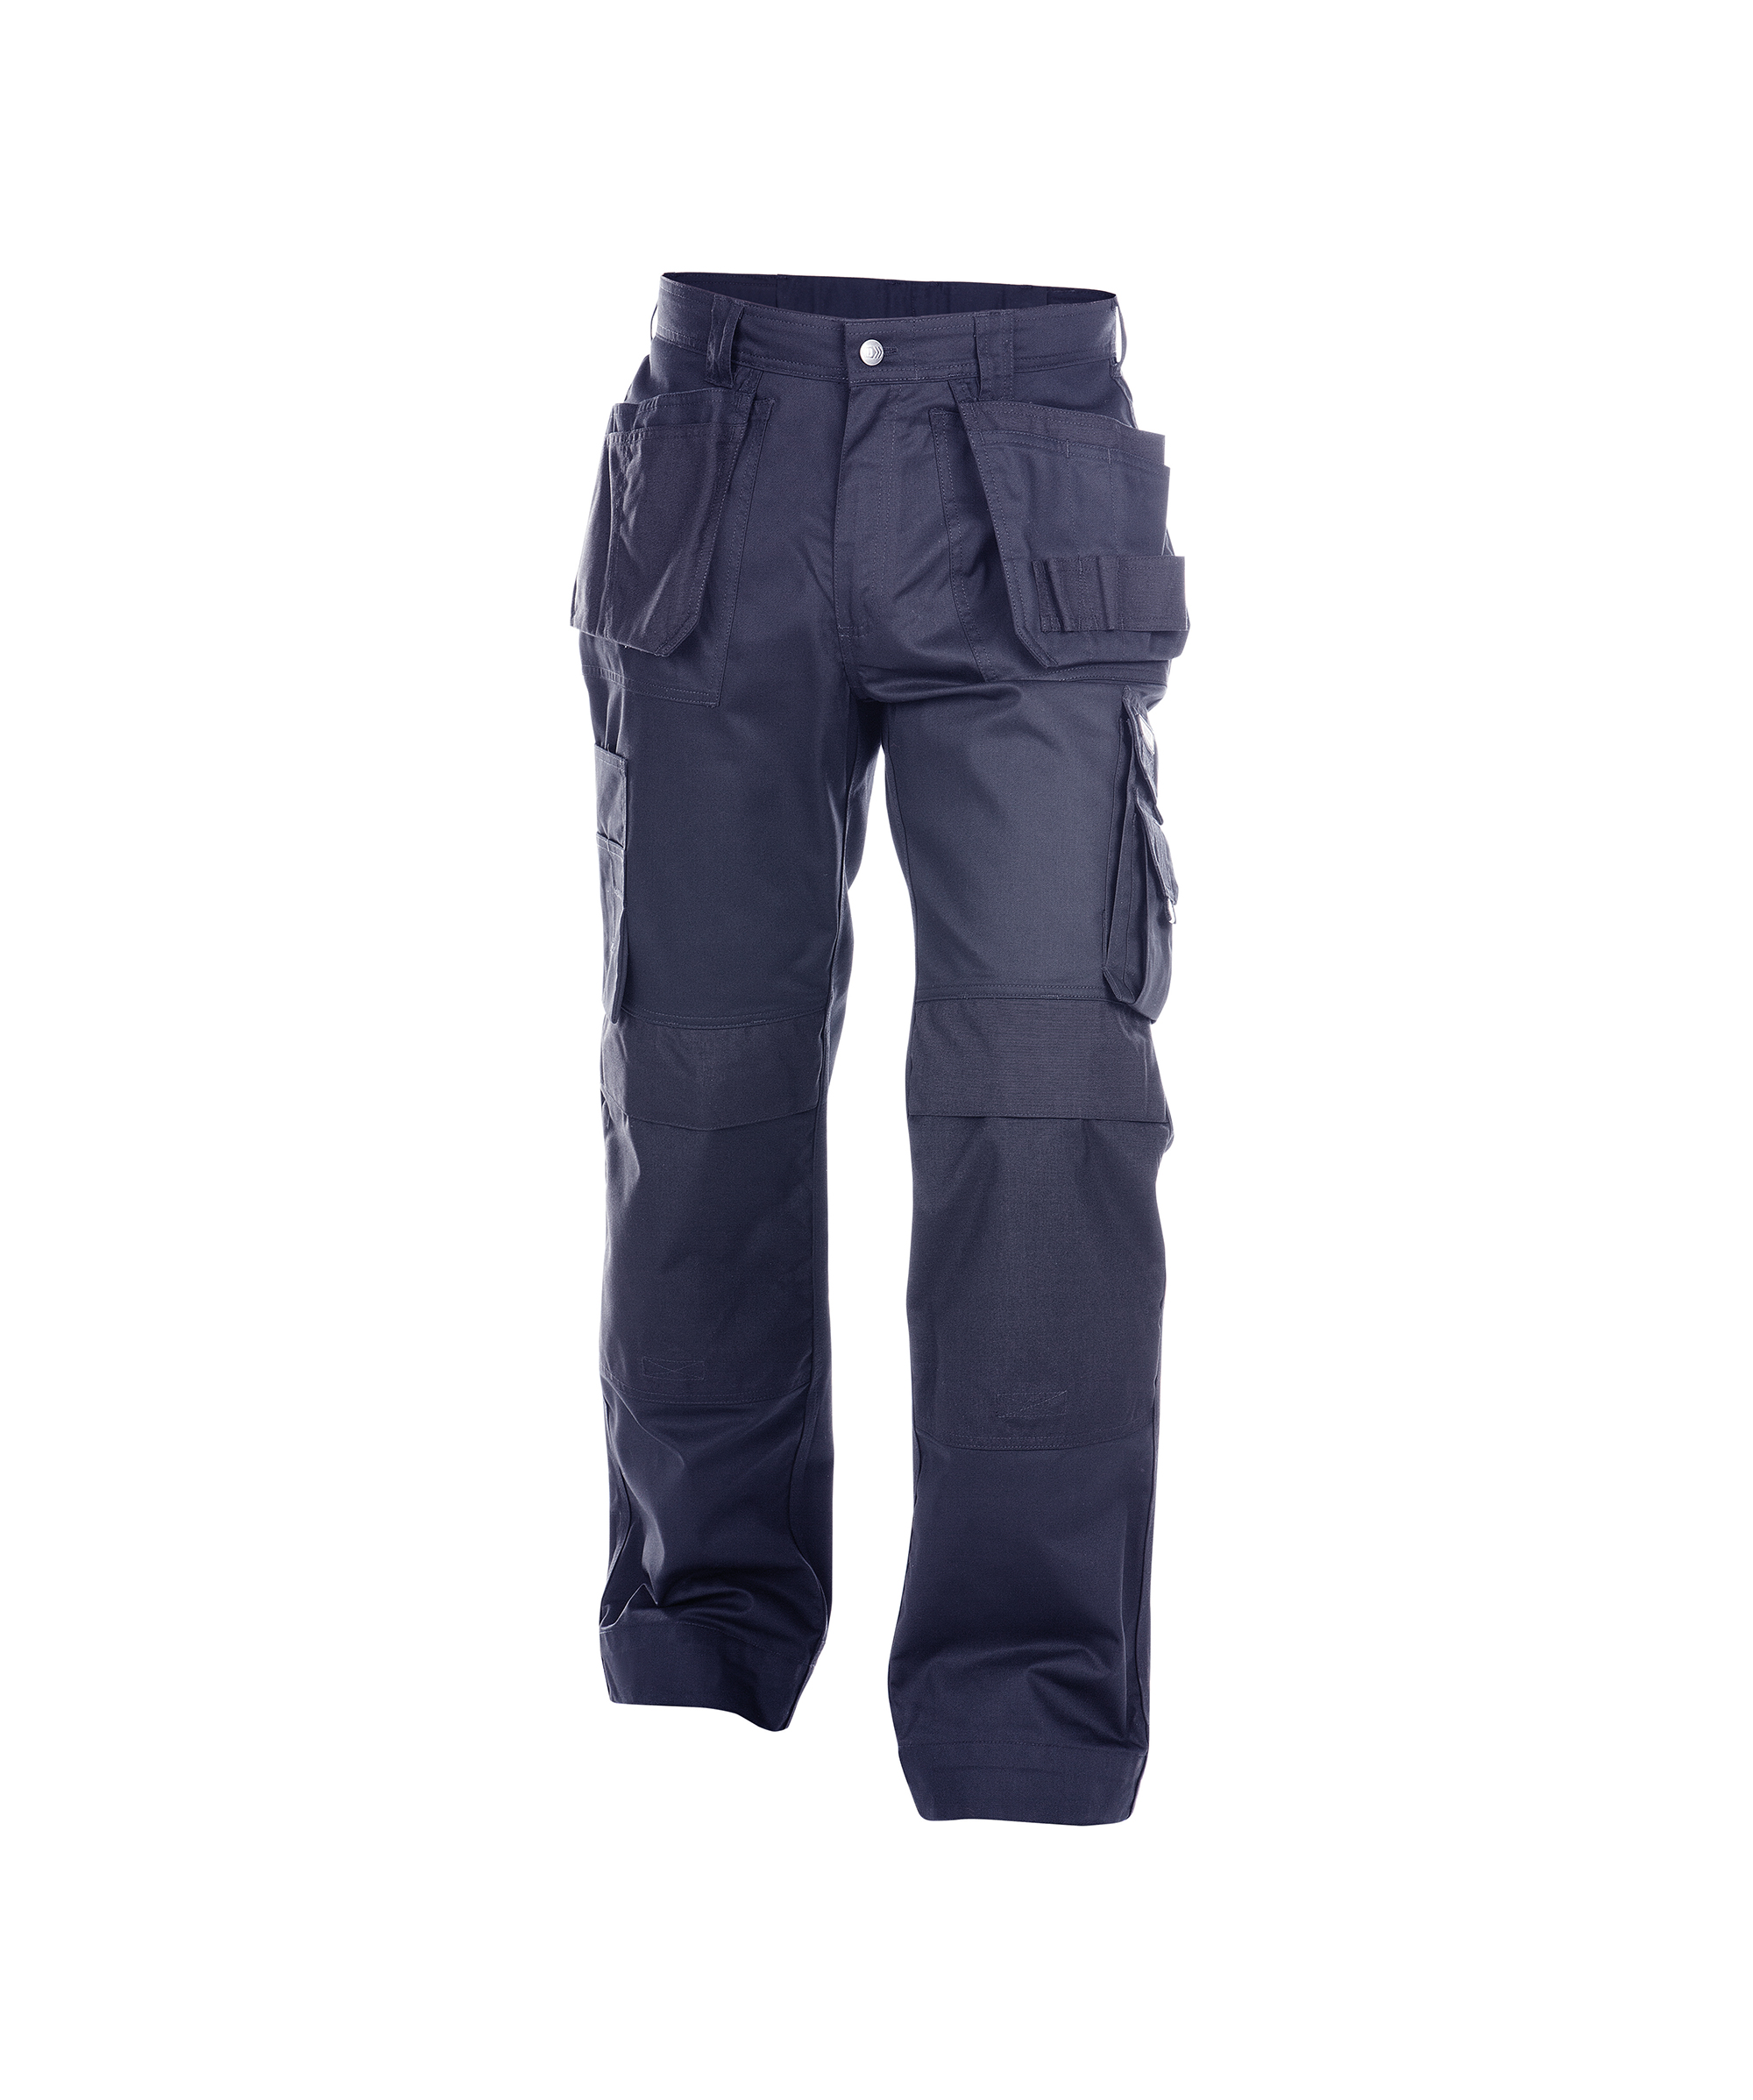 oxford_work-trousers-with-multi-pockets-and-knee-pockets_navy_front.jpg